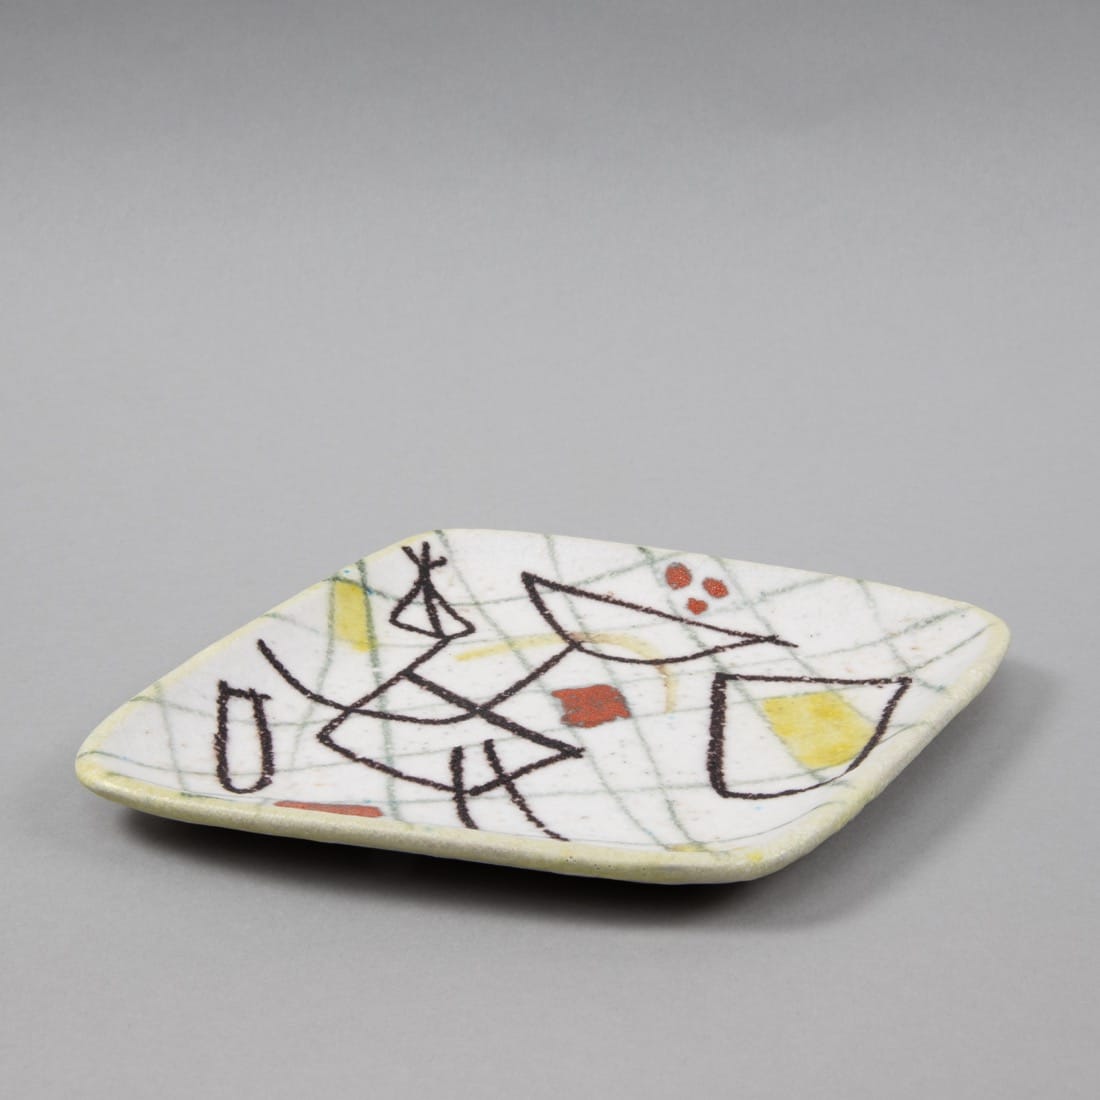 Freeform ceramic plate with abstract decor by Guido Gambone -img03